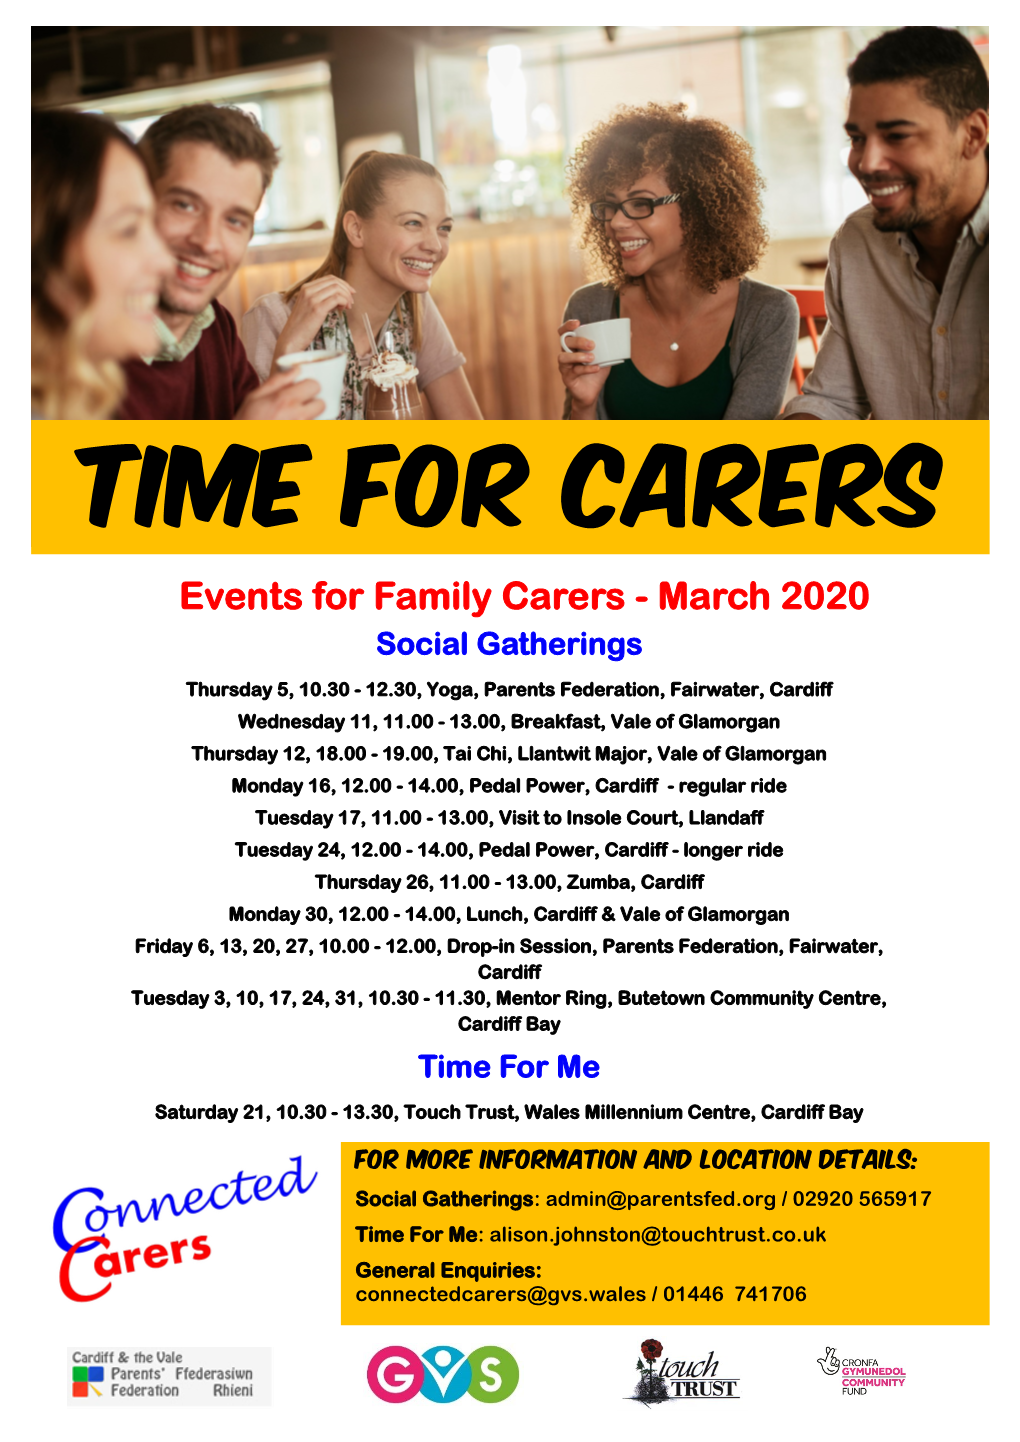 TIME for CARERS Events for Family Carers - March 2020 Social Gatherings